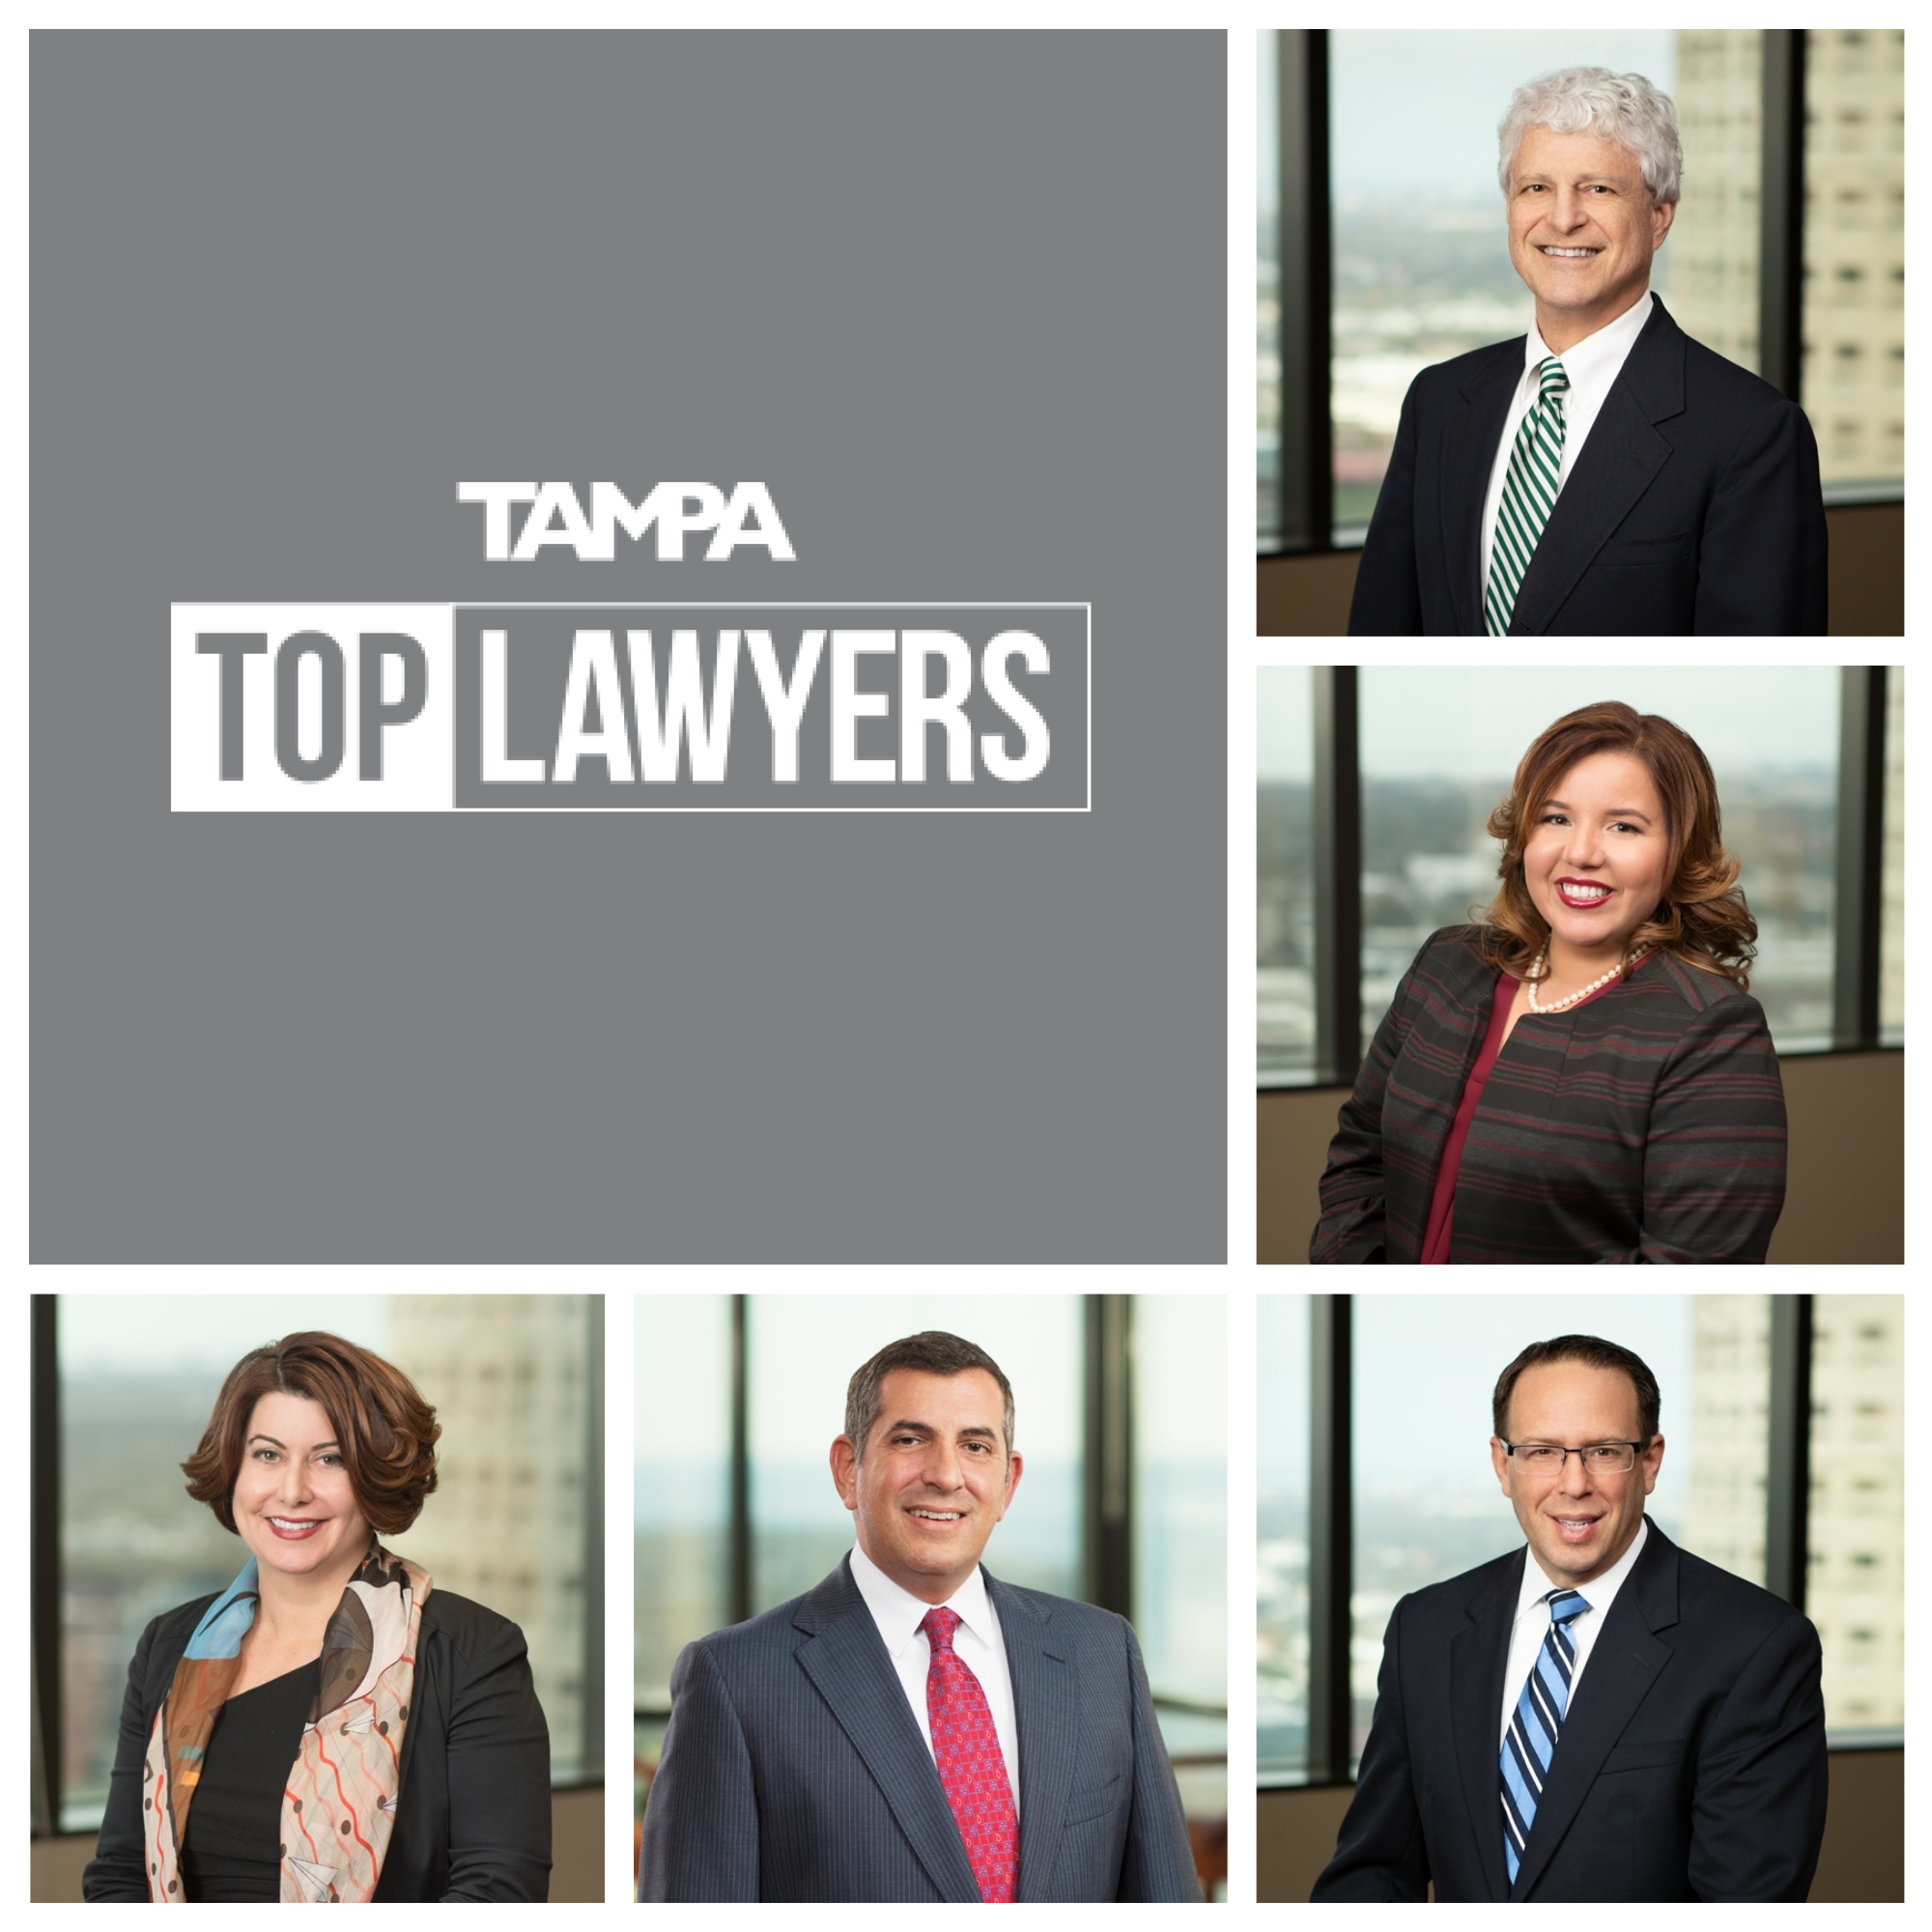 Shumaker Attorneys Recognized as Top Lawyers 2019 by Tampa Magazine